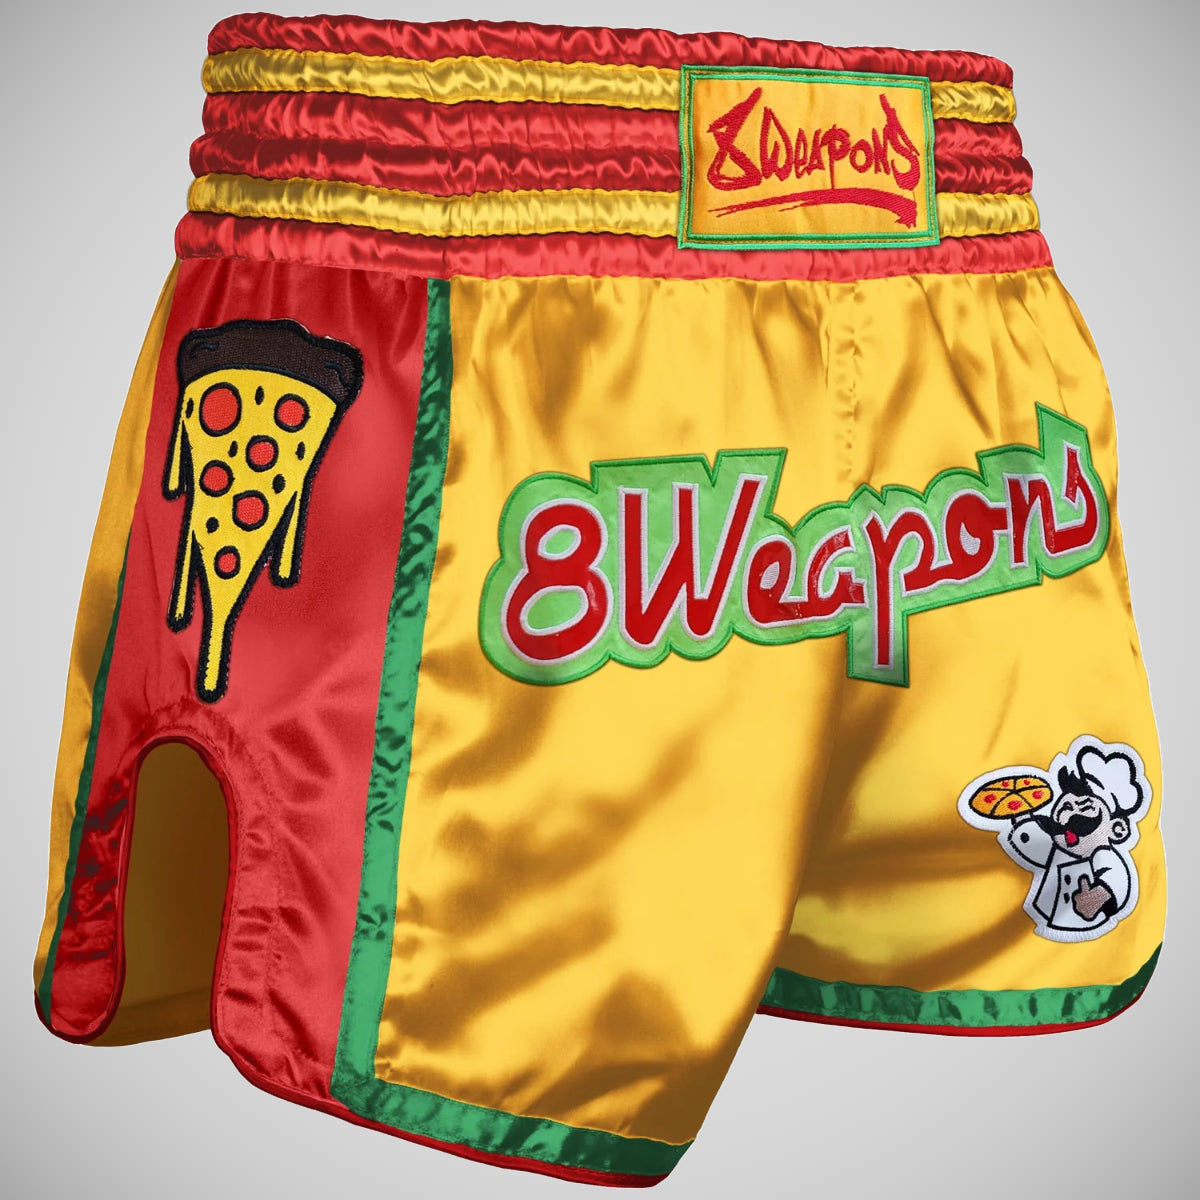 8 WEAPONS Muay Thai Shorts, Snake, red – 8 WEAPONS Fightgear Shop